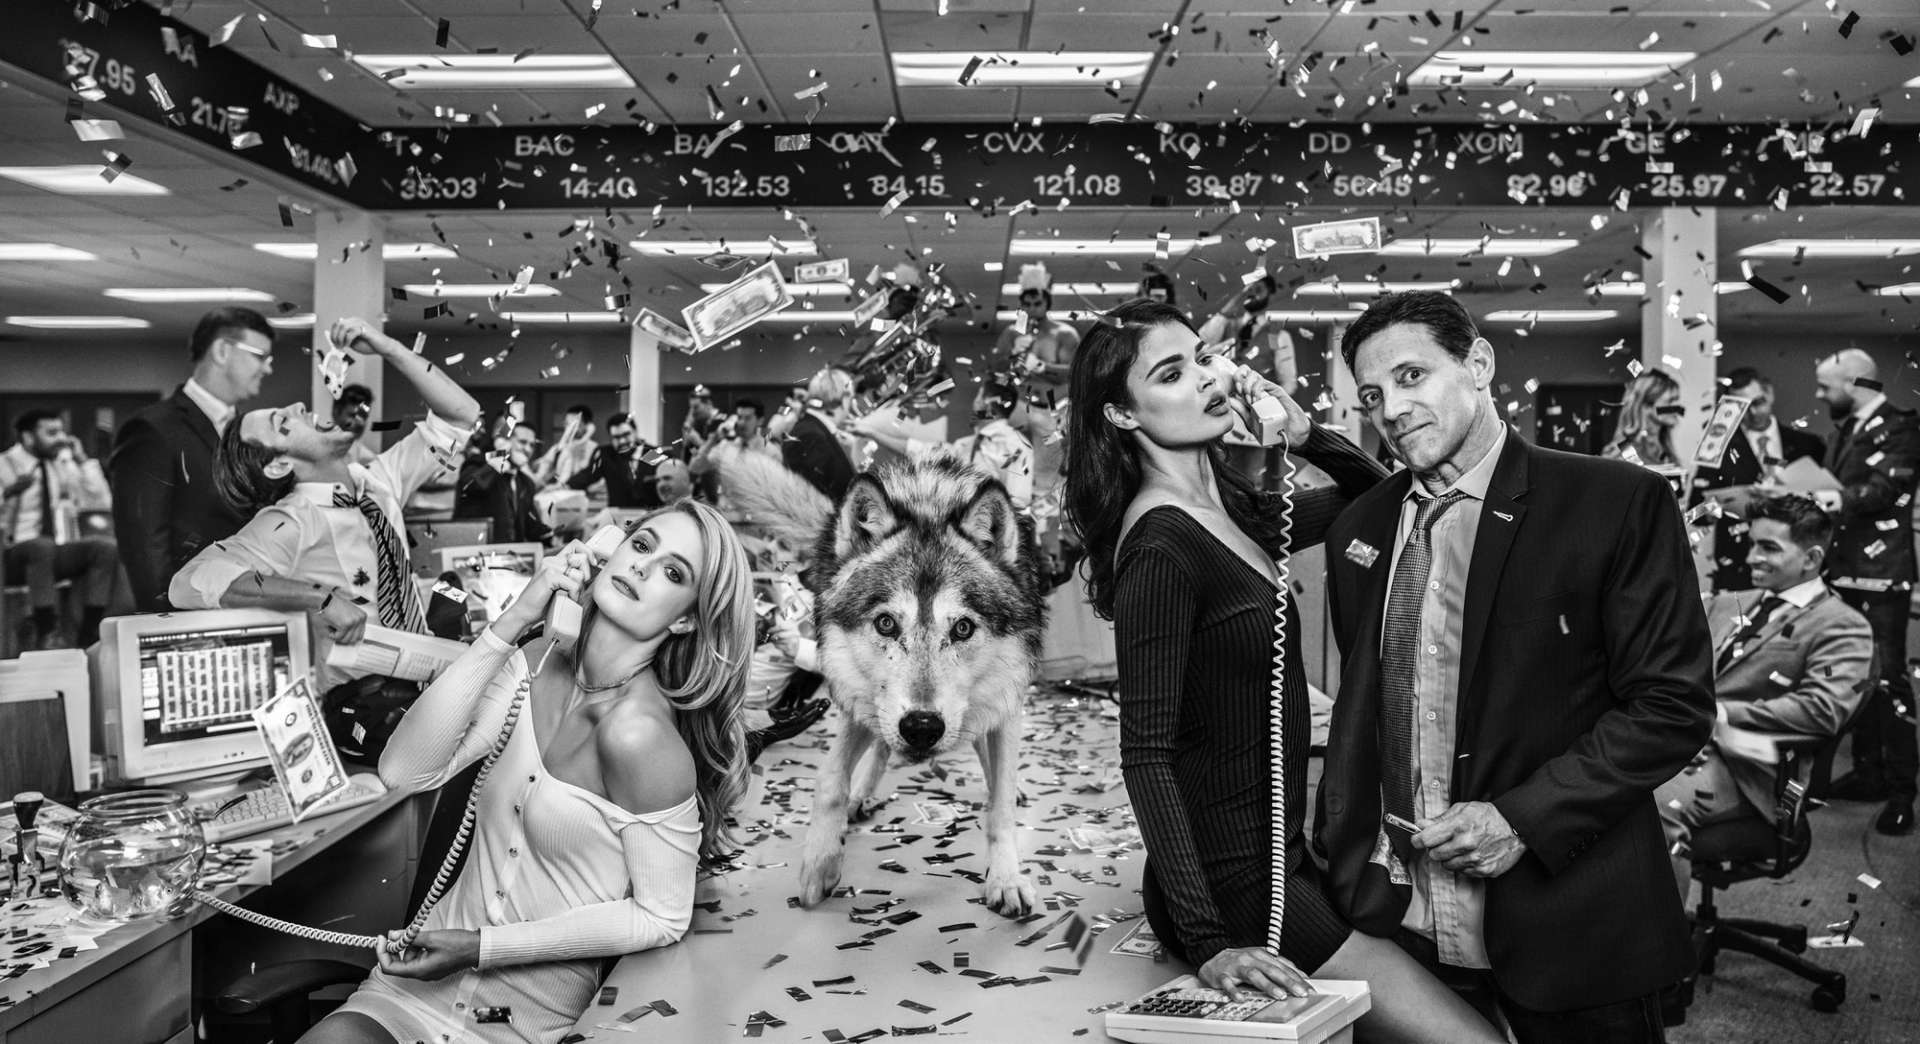 A black and white photograph by artist David Yarrow, showing the “Wolf of Wall Street” Jordan Belfort standing alongside models and an actual wolf, while confetti and money falls from the sky.